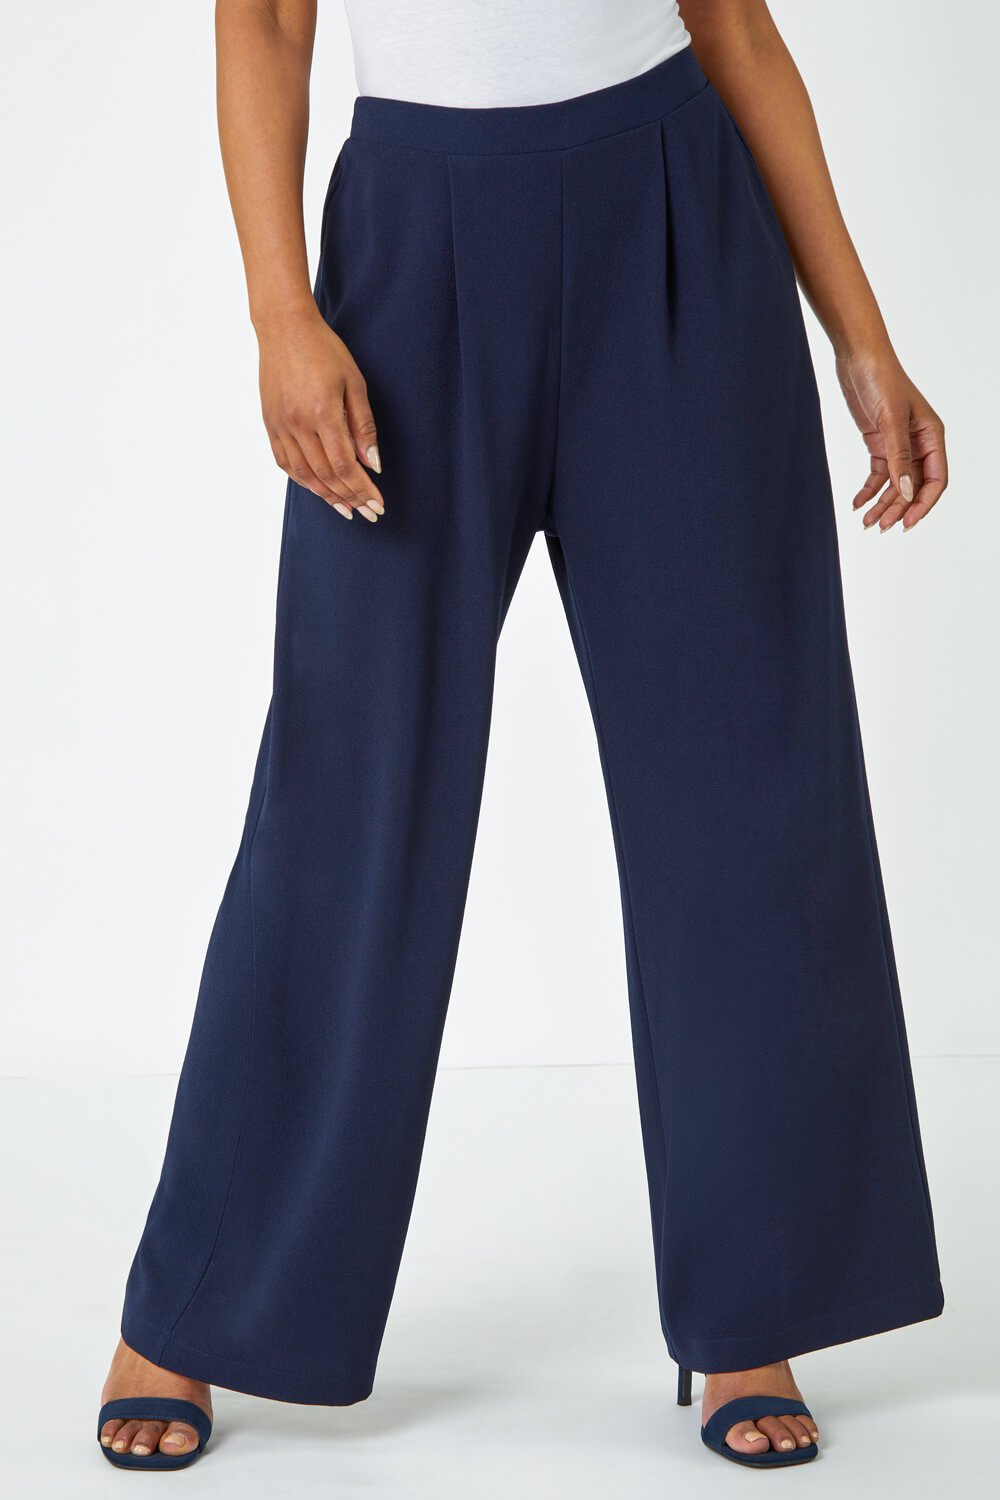 Navy  Petite Wide Leg Stretch Trousers, Image 2 of 6